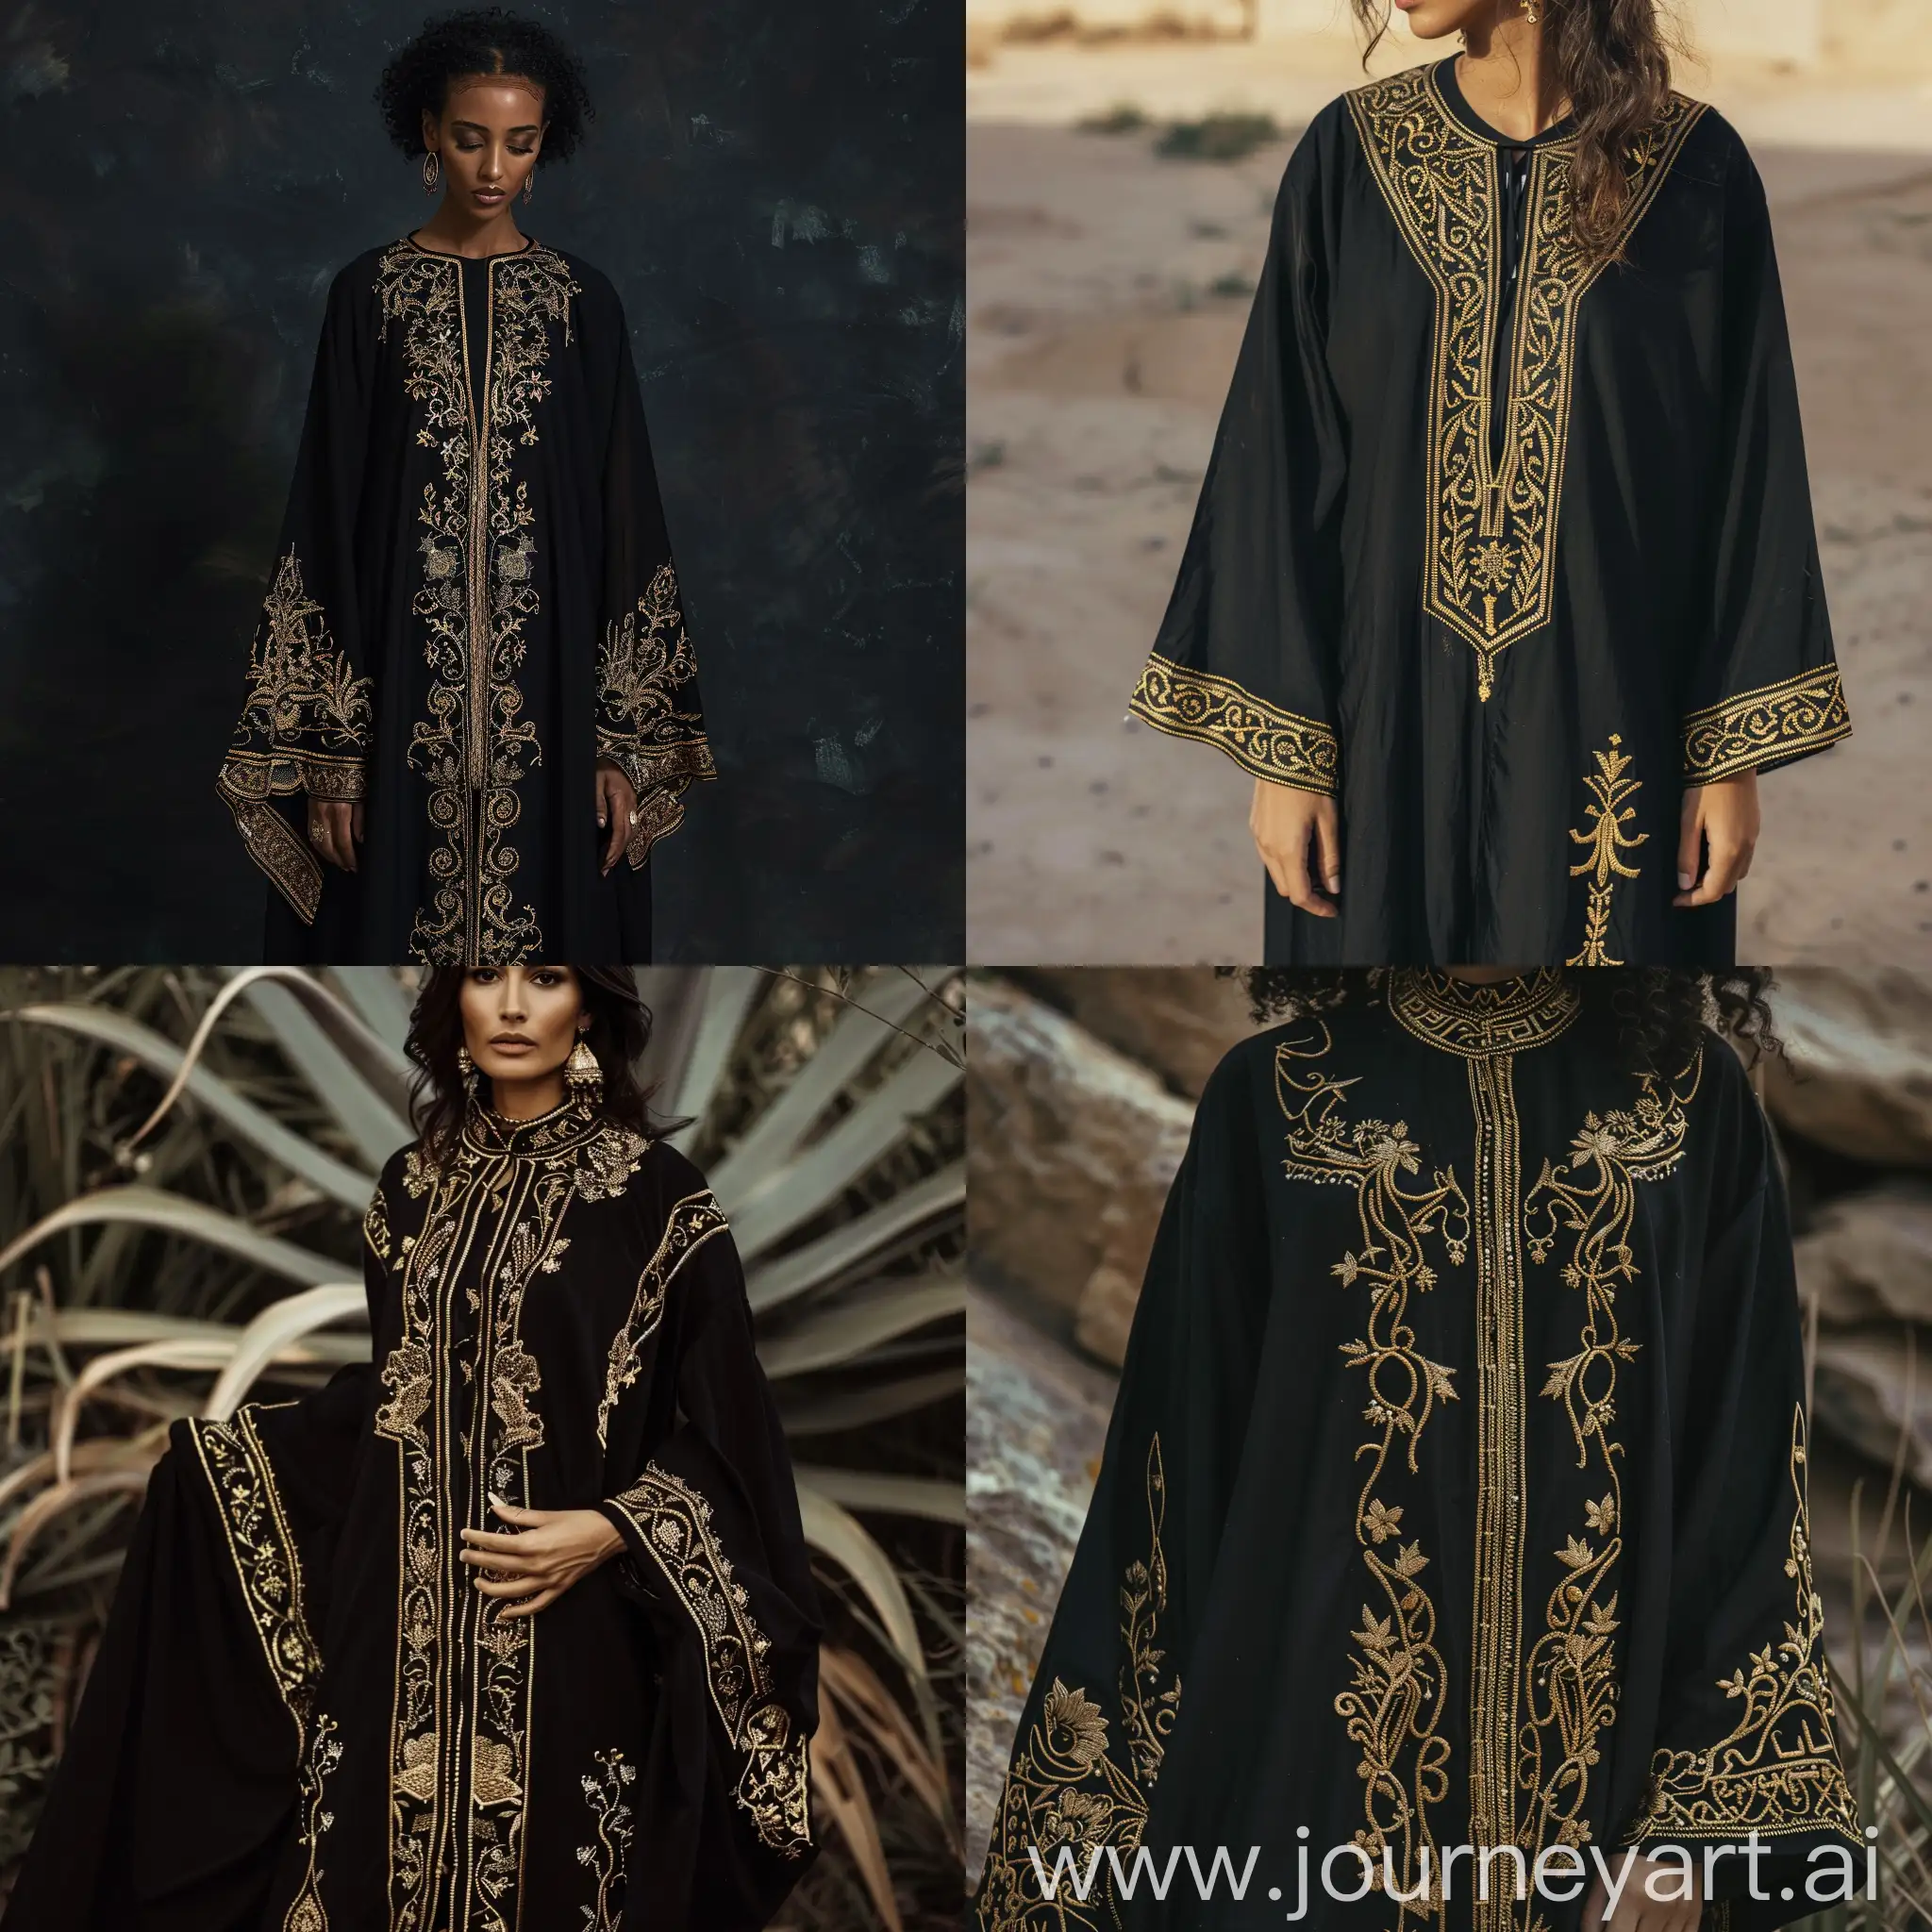 make image,  a 30 years old dressed in an elegant black Moroccan Caftan with detailed gold embroidery